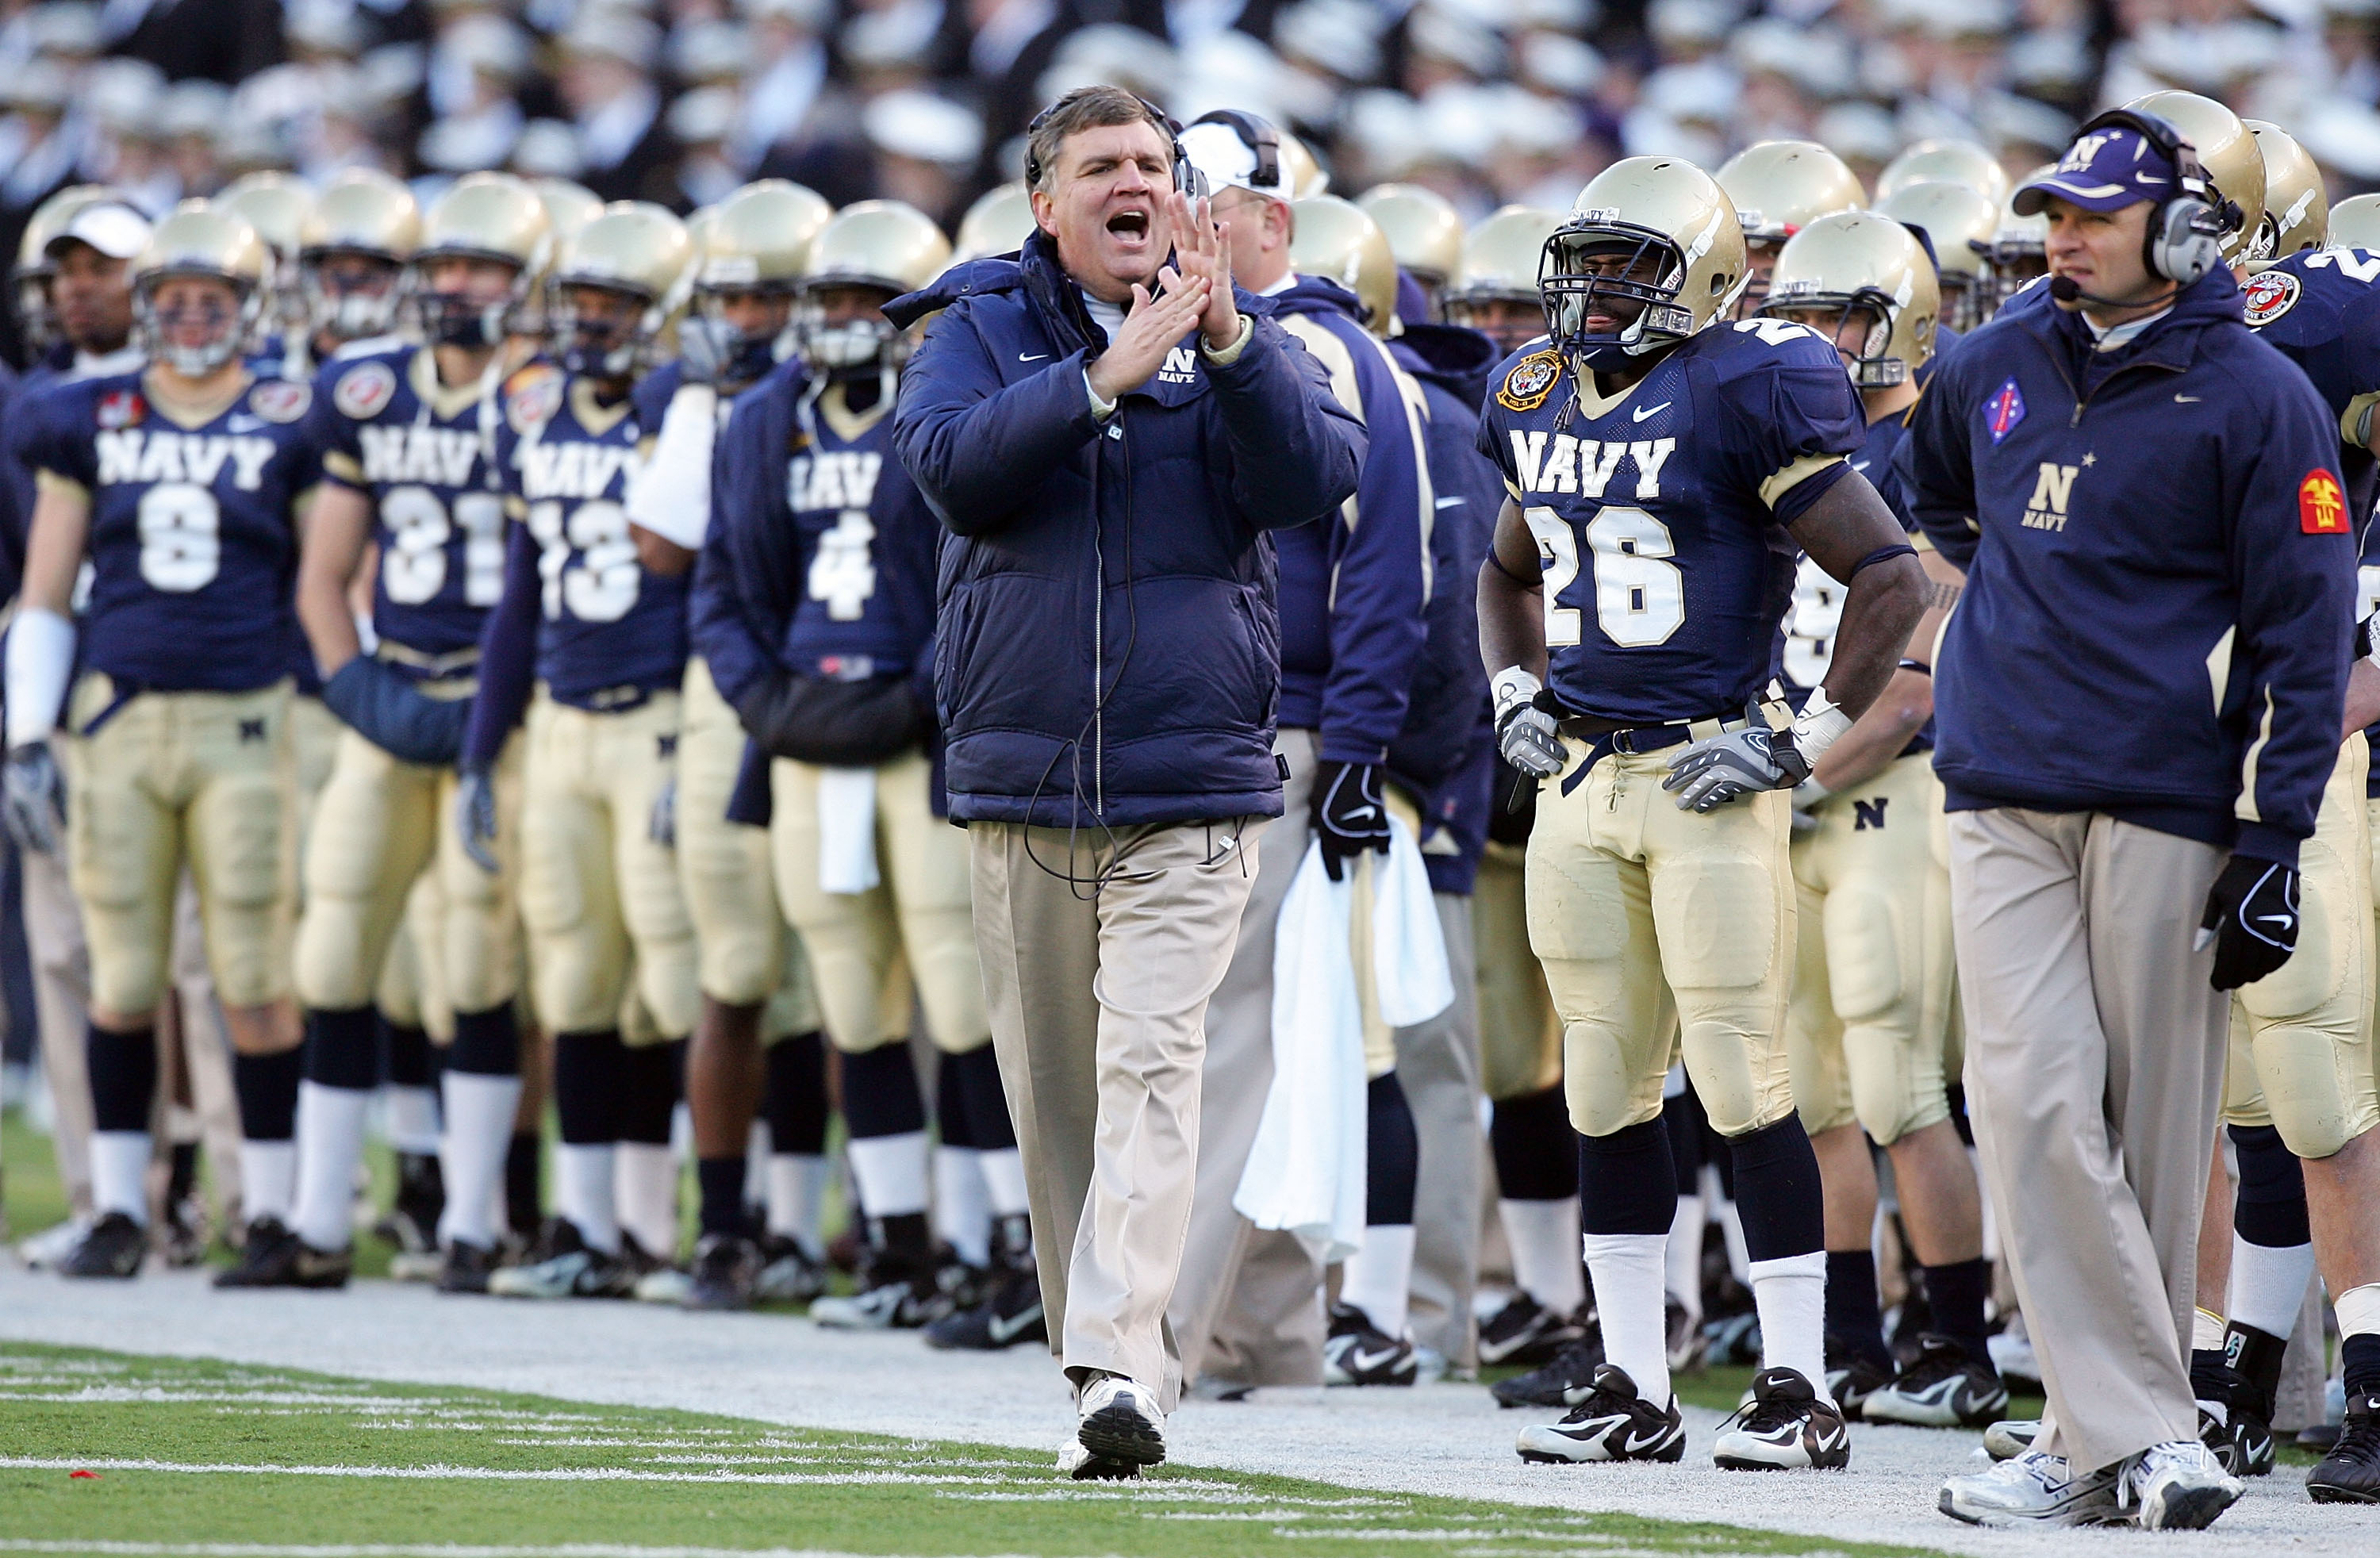 BALTIMORE - DECEMBER 01:  Head coach Paul Johnson of the Navy Midshipmen yells to his team against the Army Black Knights during the 108th Army v Navy football game on December 1, 2007 at M&T Bank Stadium in Baltimore, Maryland.  (Photo by Jim McIsaac/Get